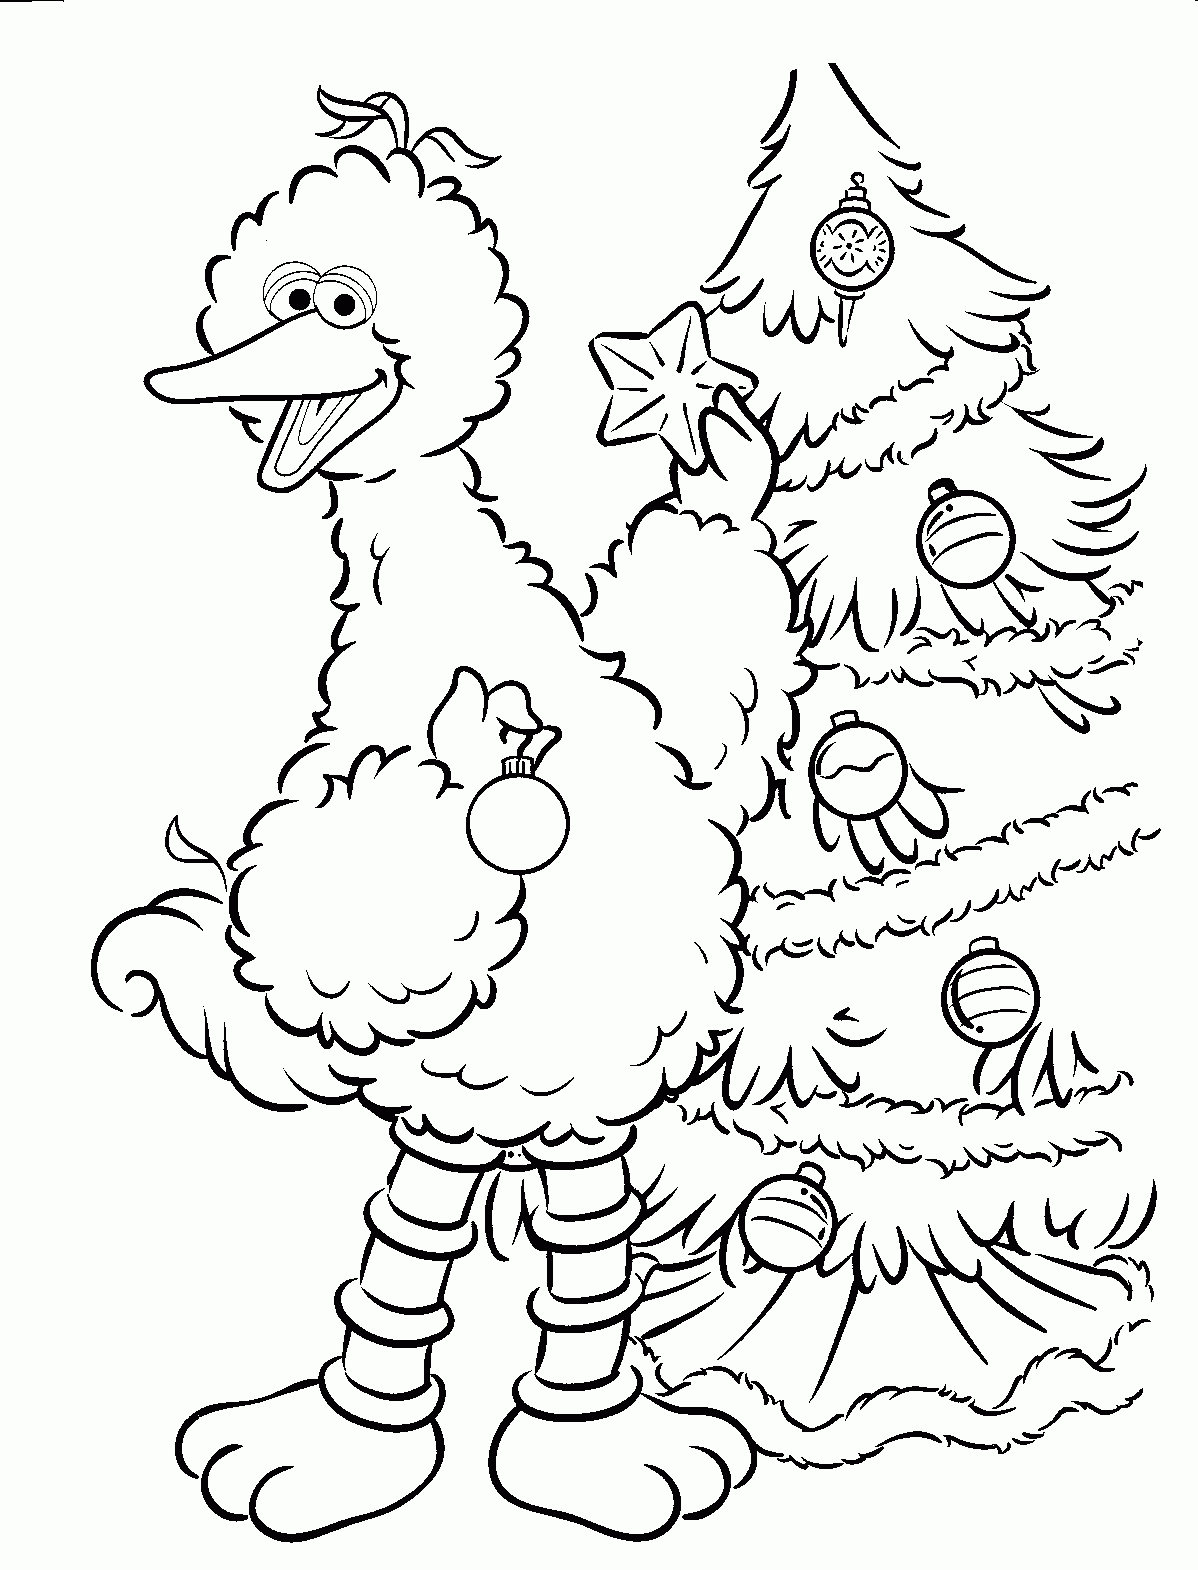 Sesame Street Sports Coloring Pages - Coloring Home